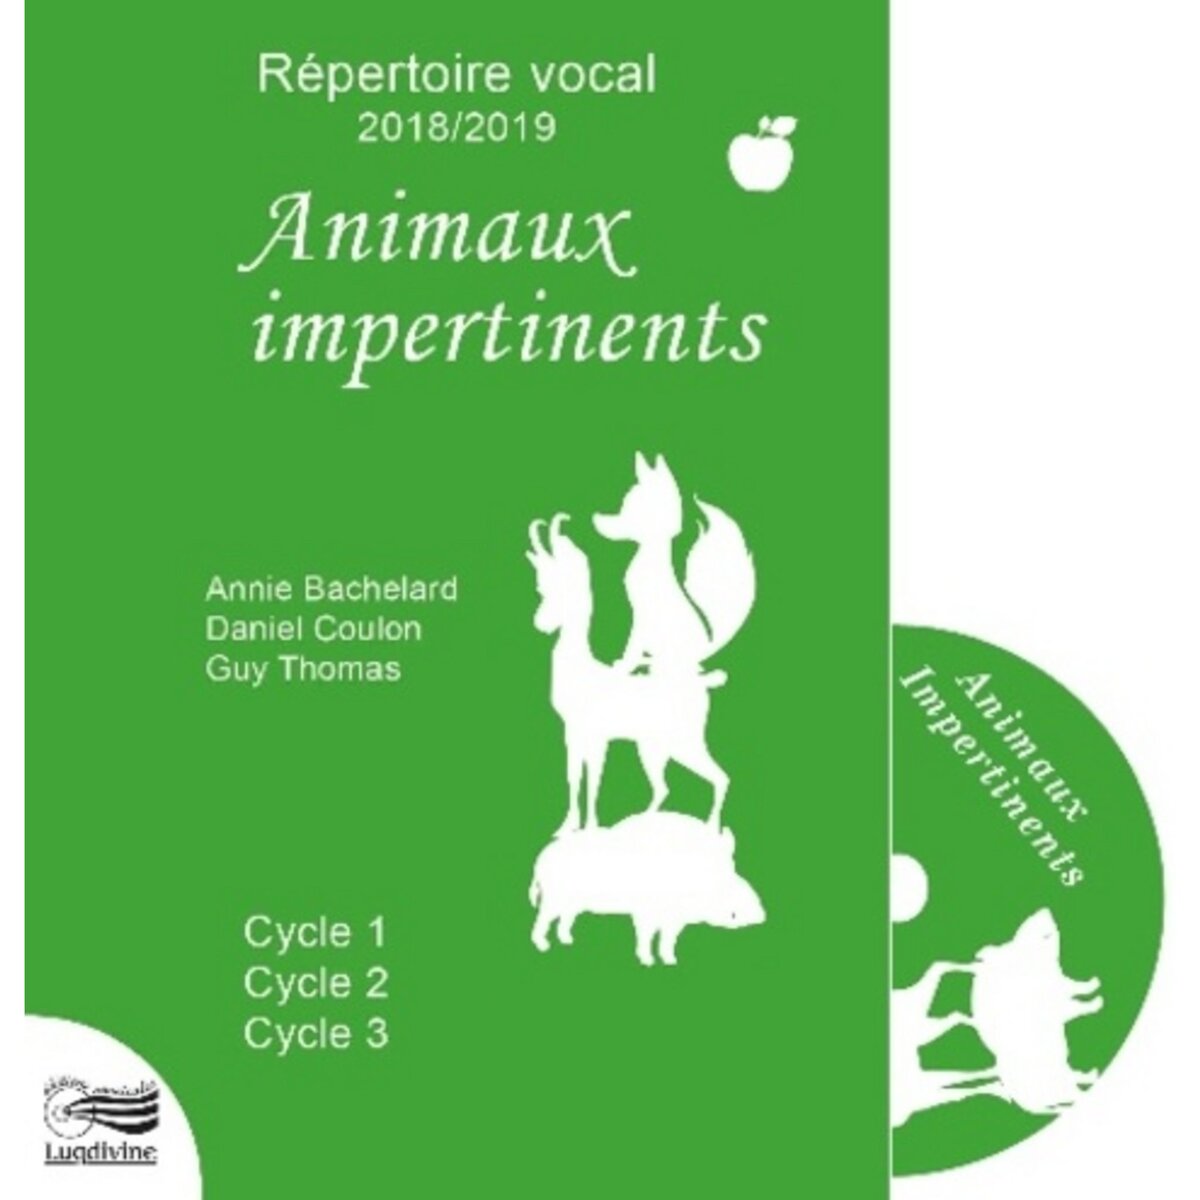  ANIMAUX IMPERTINENTS. CYCLE 1, CYCLE 2, CYCLE 3, EDITION 2018-2019, AVEC 1 CD AUDIO, Bachelard Annie